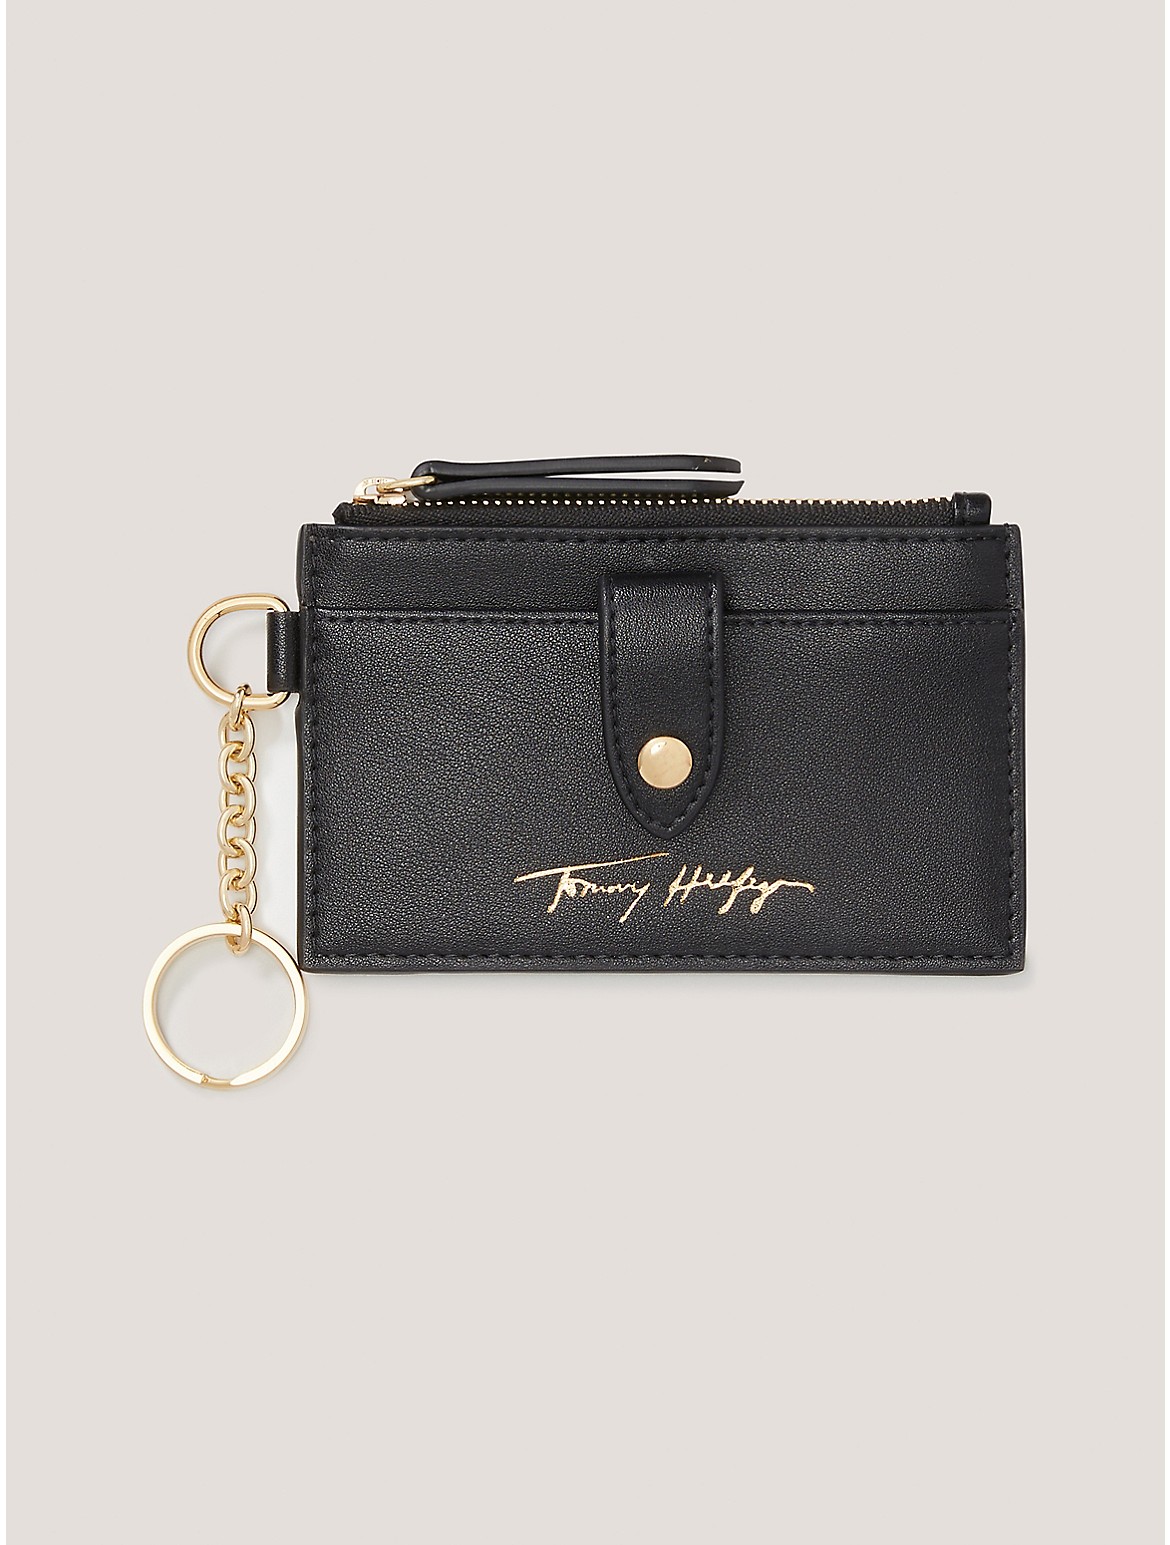 Tommy Hilfiger Women's Signature Coin Purse and ID Wallet - Black